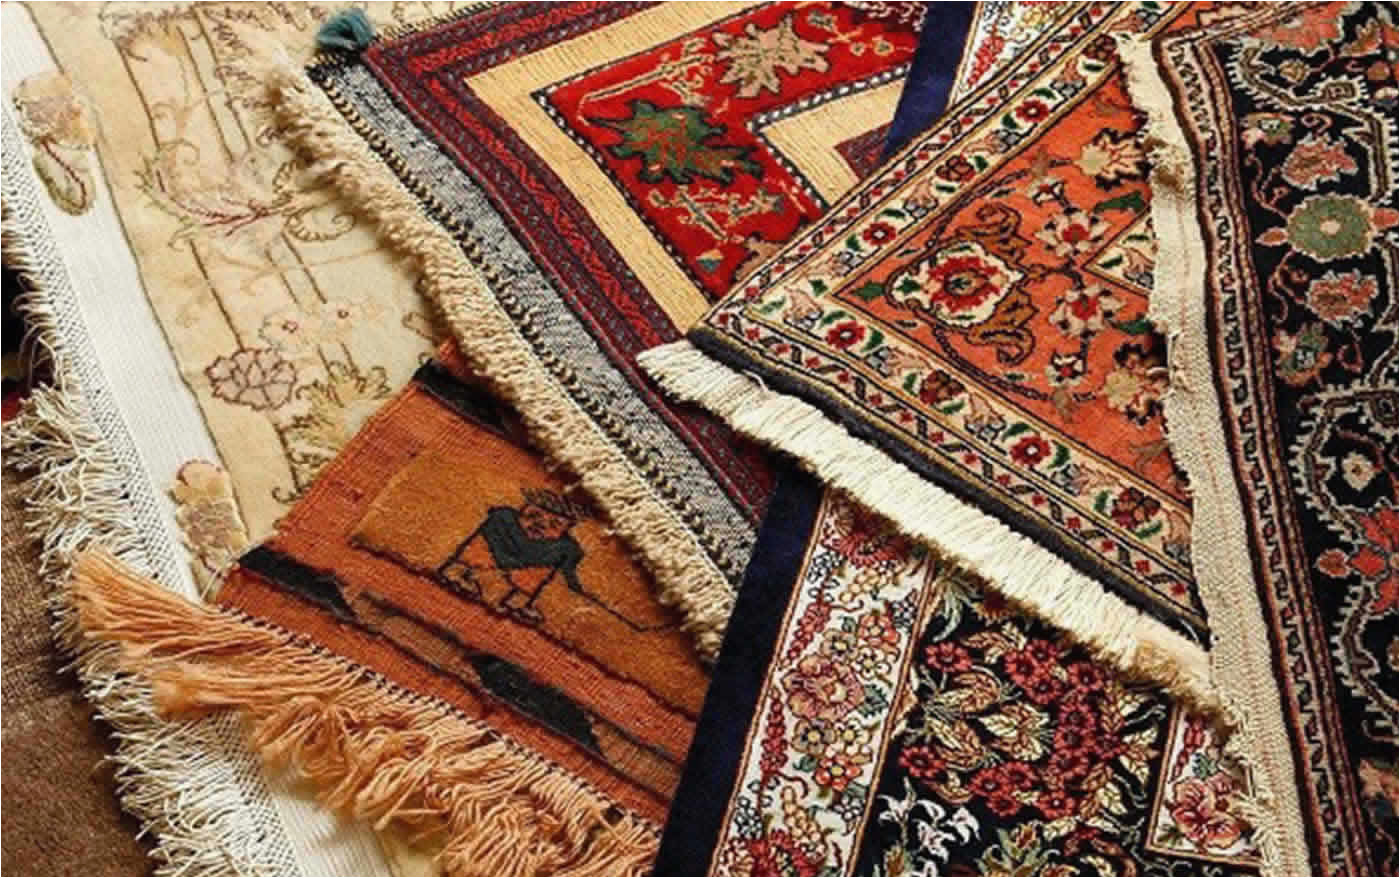 Area Rug Cleaning Las Vegas Nv area Rug Cleaning Cost Las Vegas, Nv oriental Express